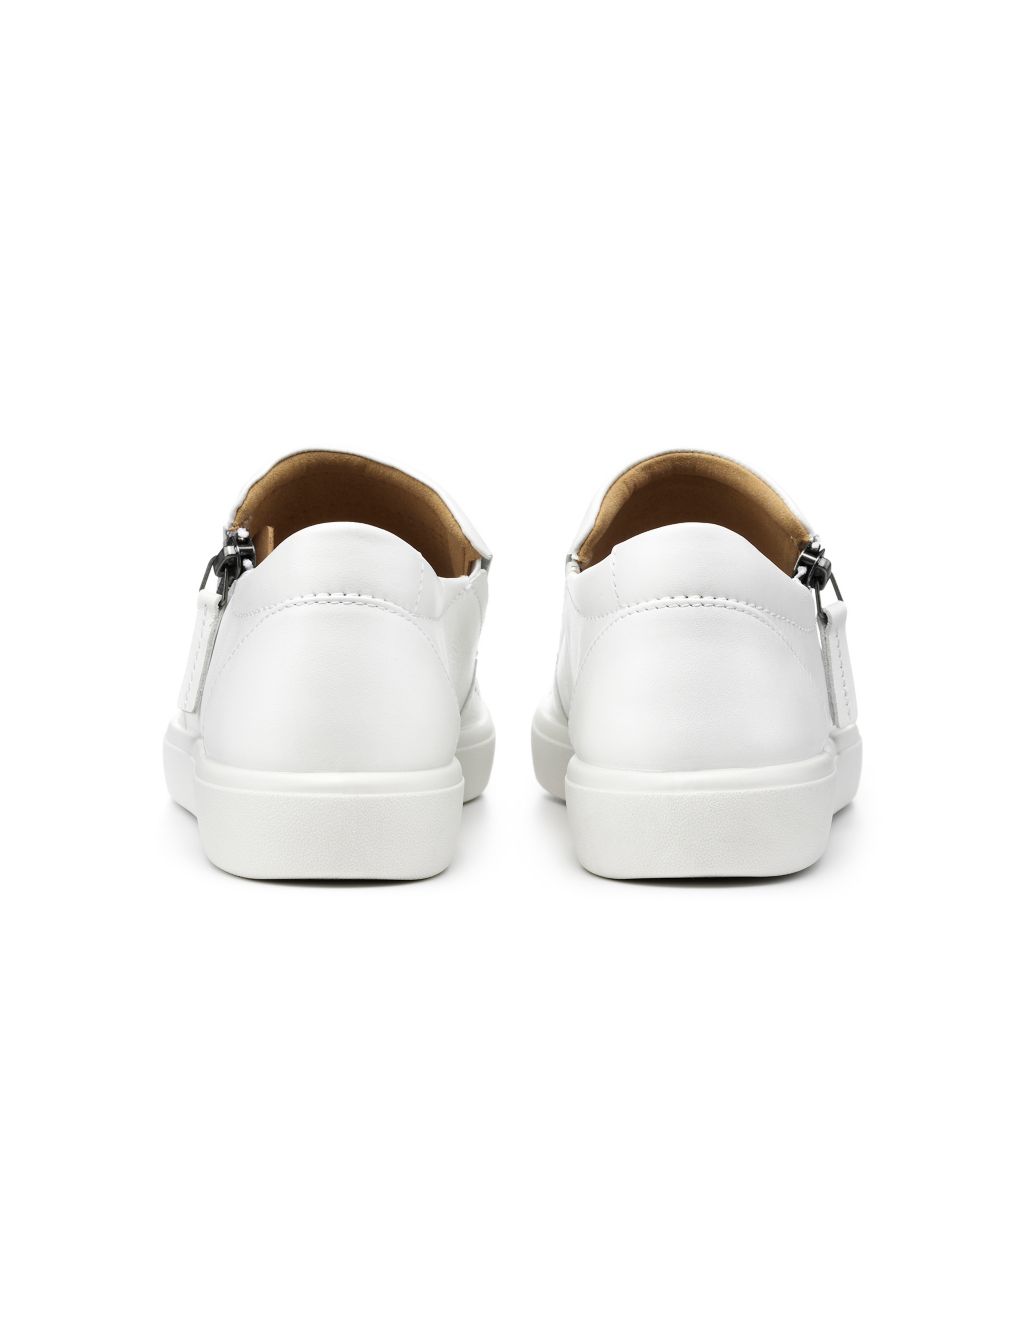 Daisy Wide Fit Leather Flat Boat Shoes image 3